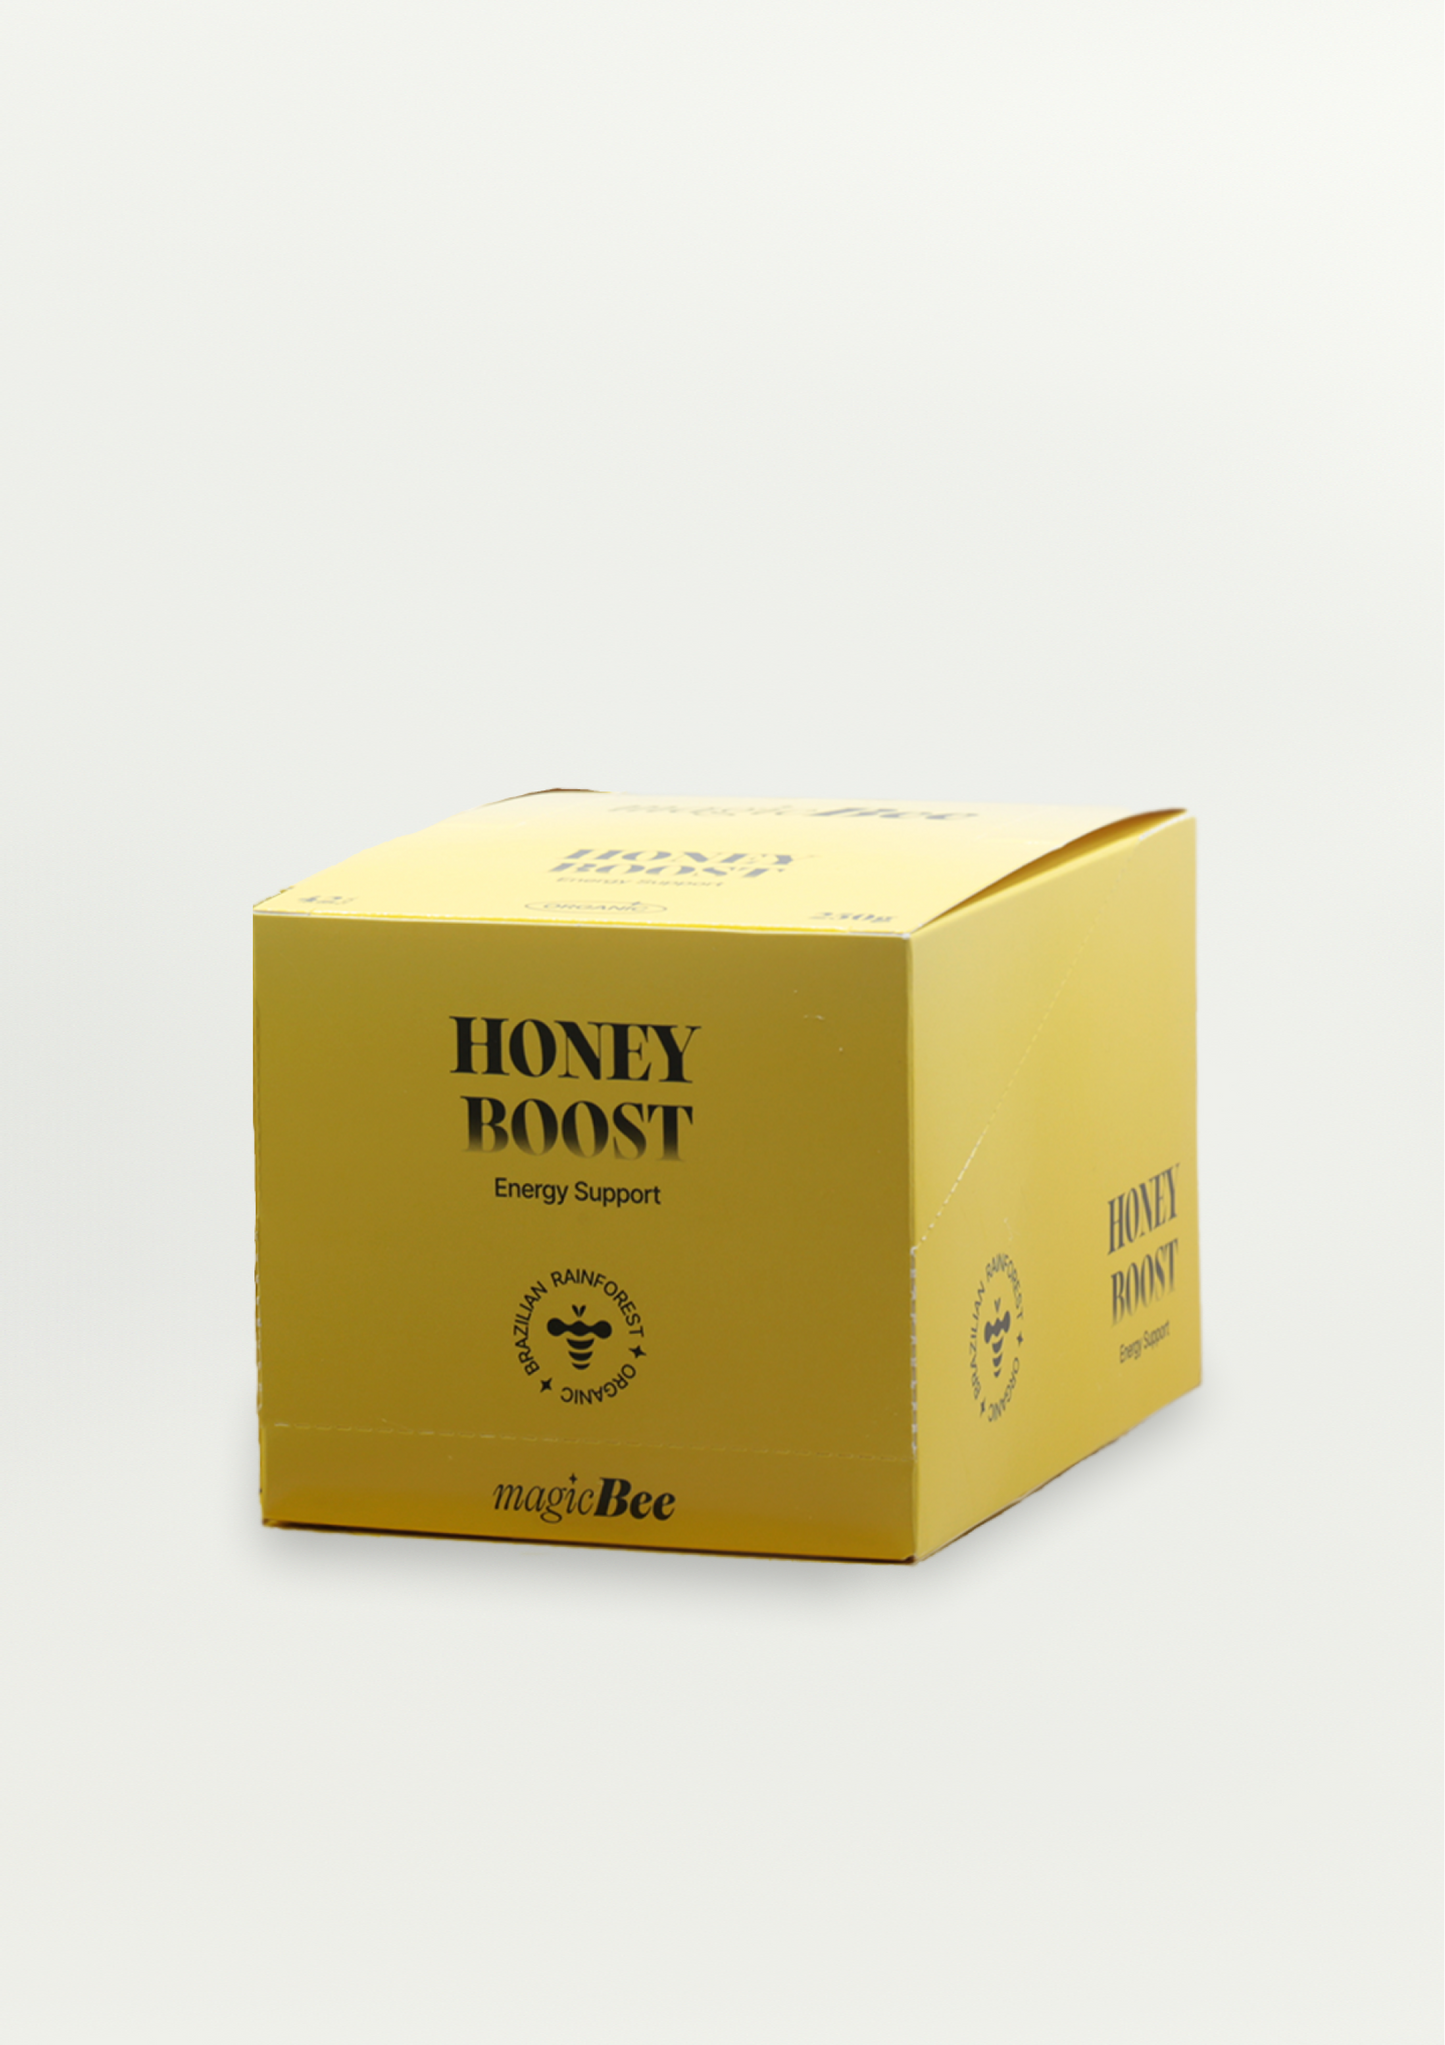 Honey Boost Package (10 units)